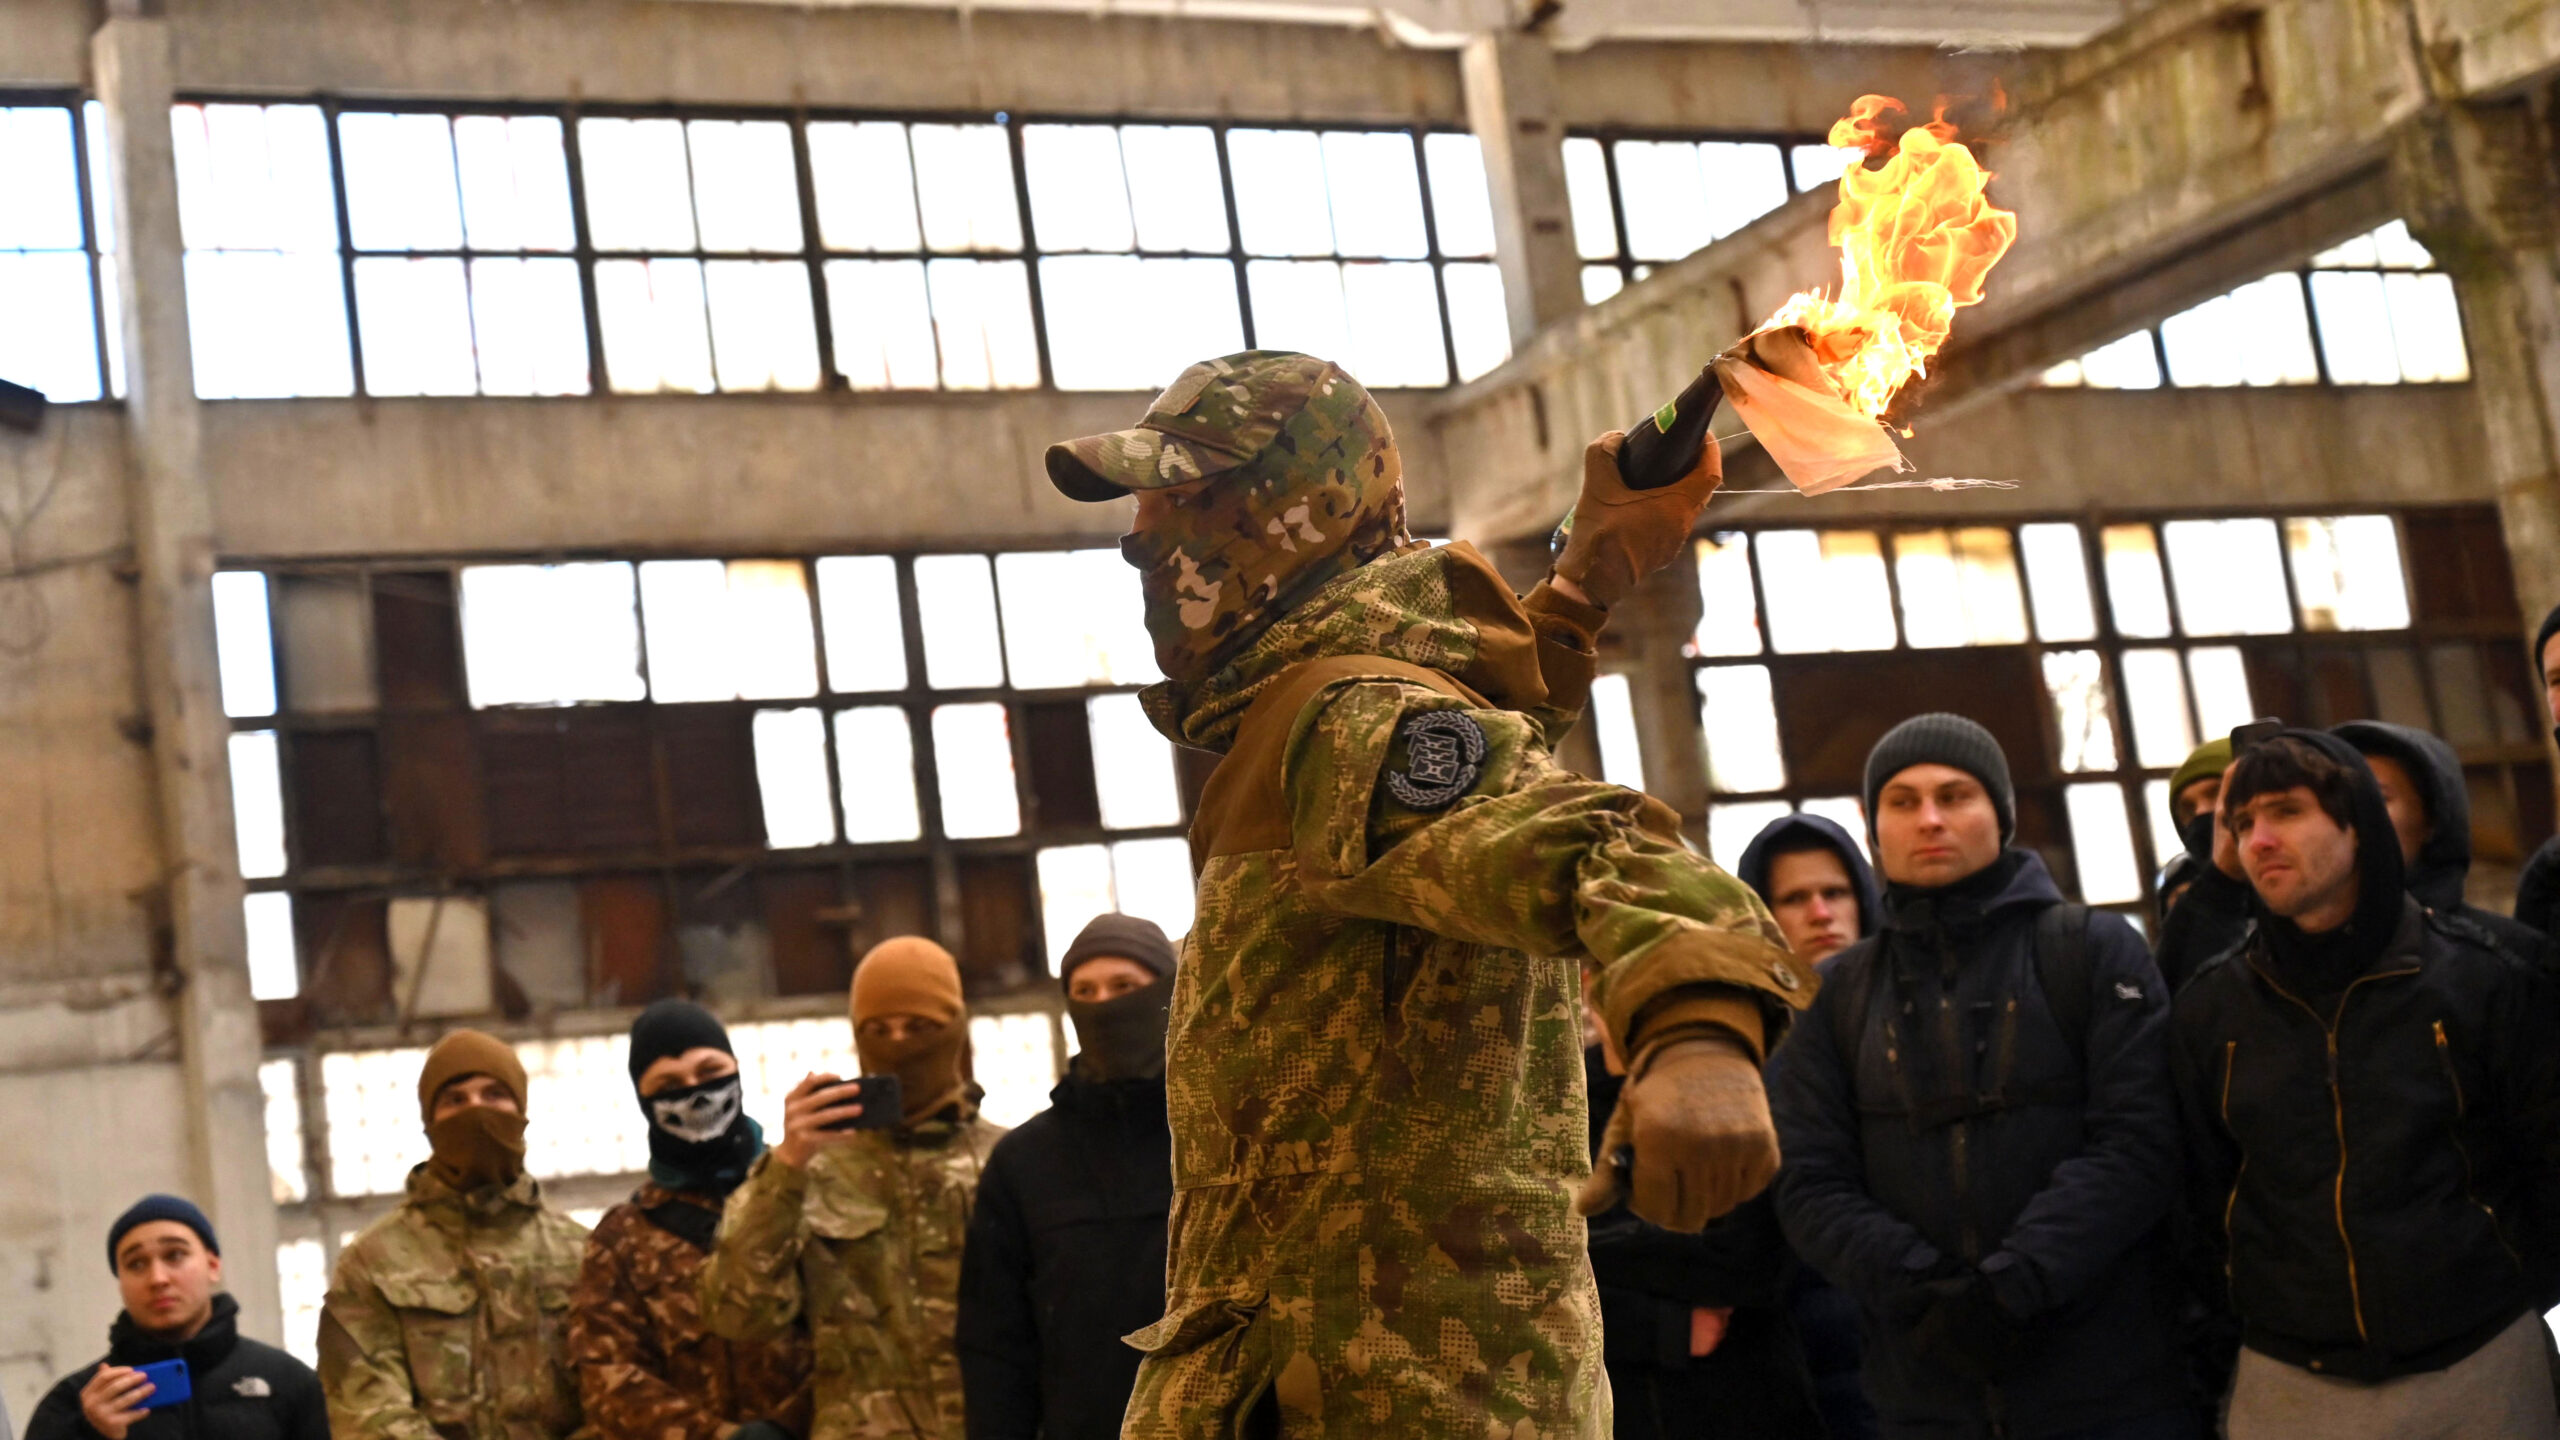 Ukraine Instructs Citizens To Make Molotov Cocktails To Burn And Destroy Invading Russian Military